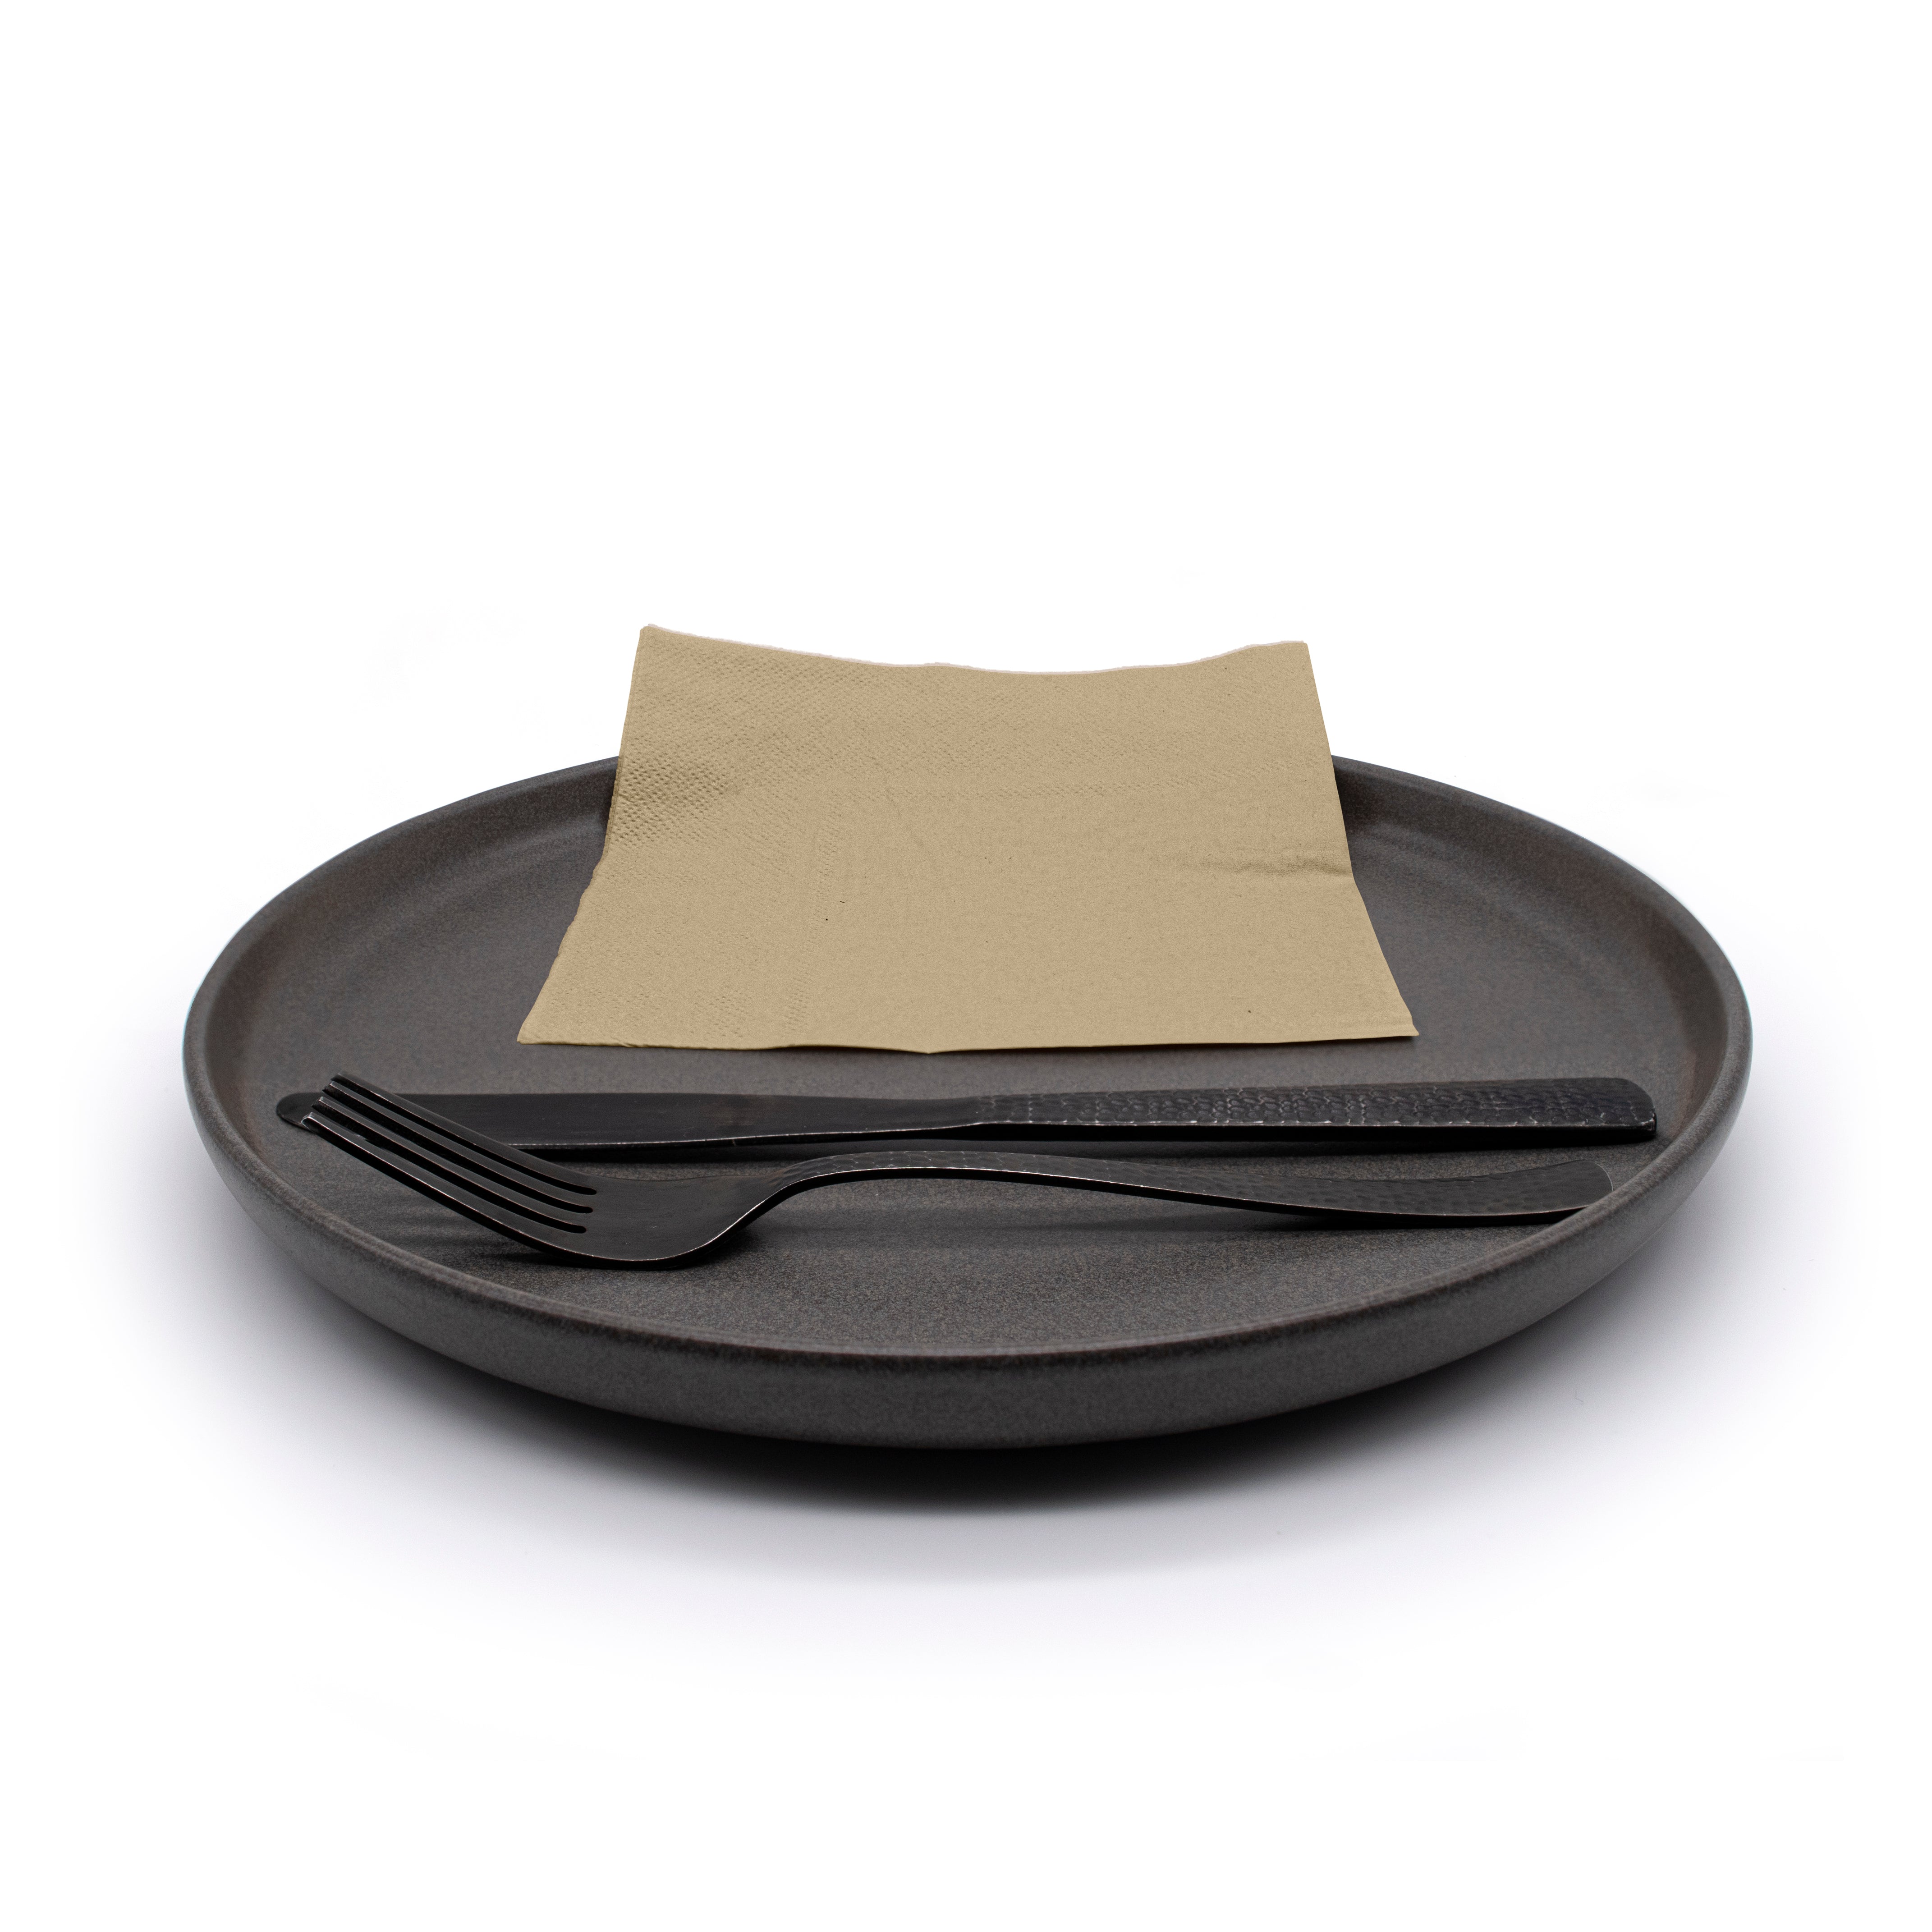 33cm napkin on black plate with cutlery